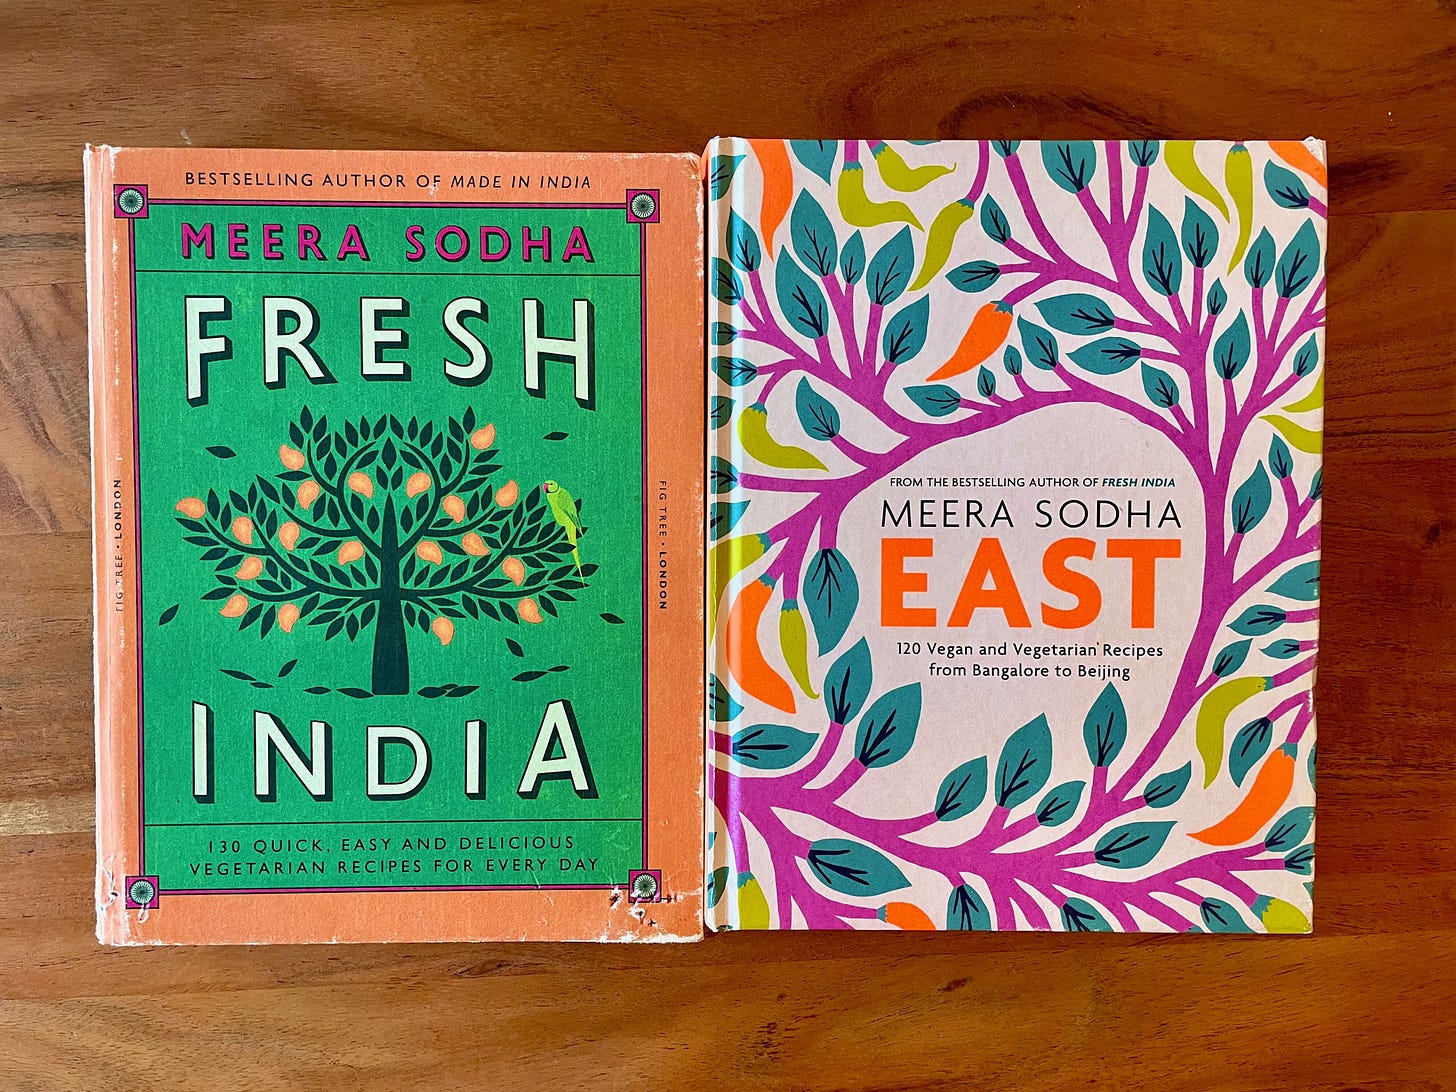 Two well-loved Meera Sodha cookbooks: Fresh India on the left and East on the right